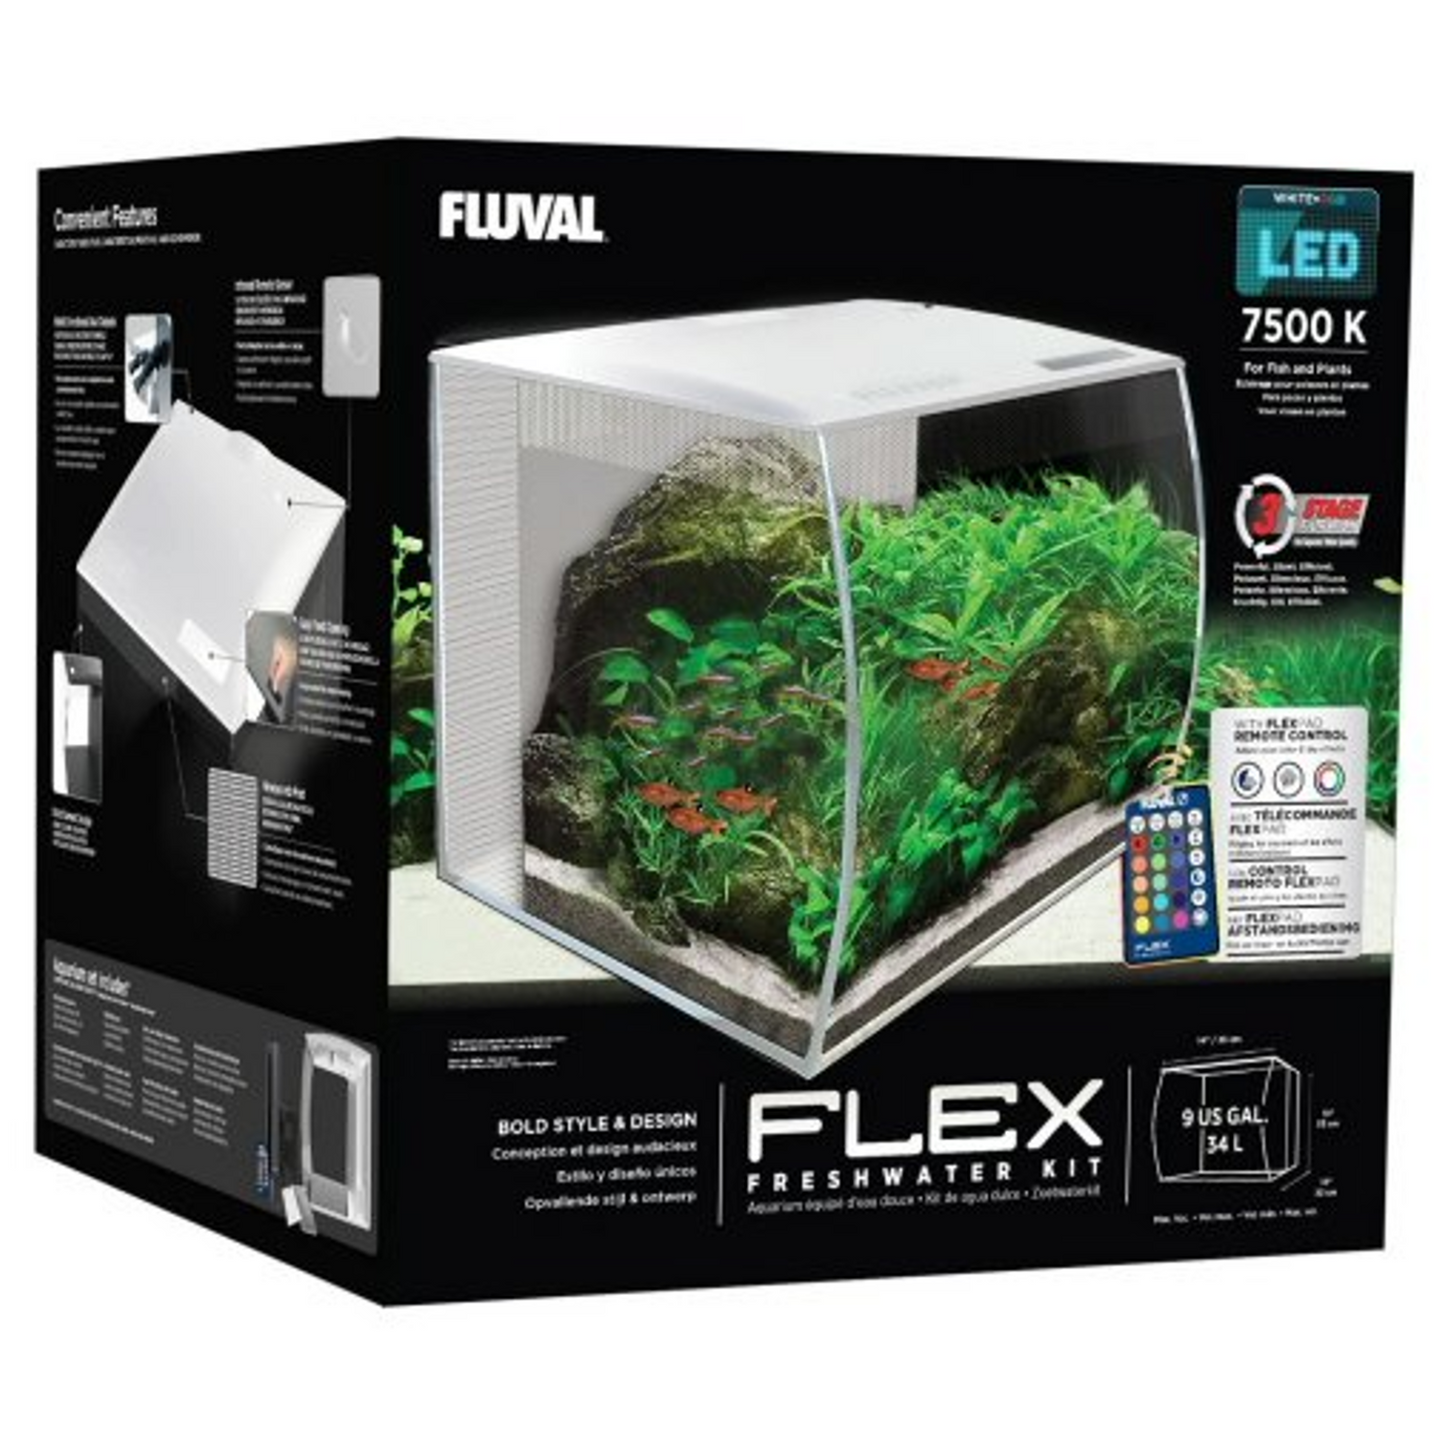 Fluval Flex LED Nano 57L with Stand - White Aquarium Tank with Integral Filter and Remote Control